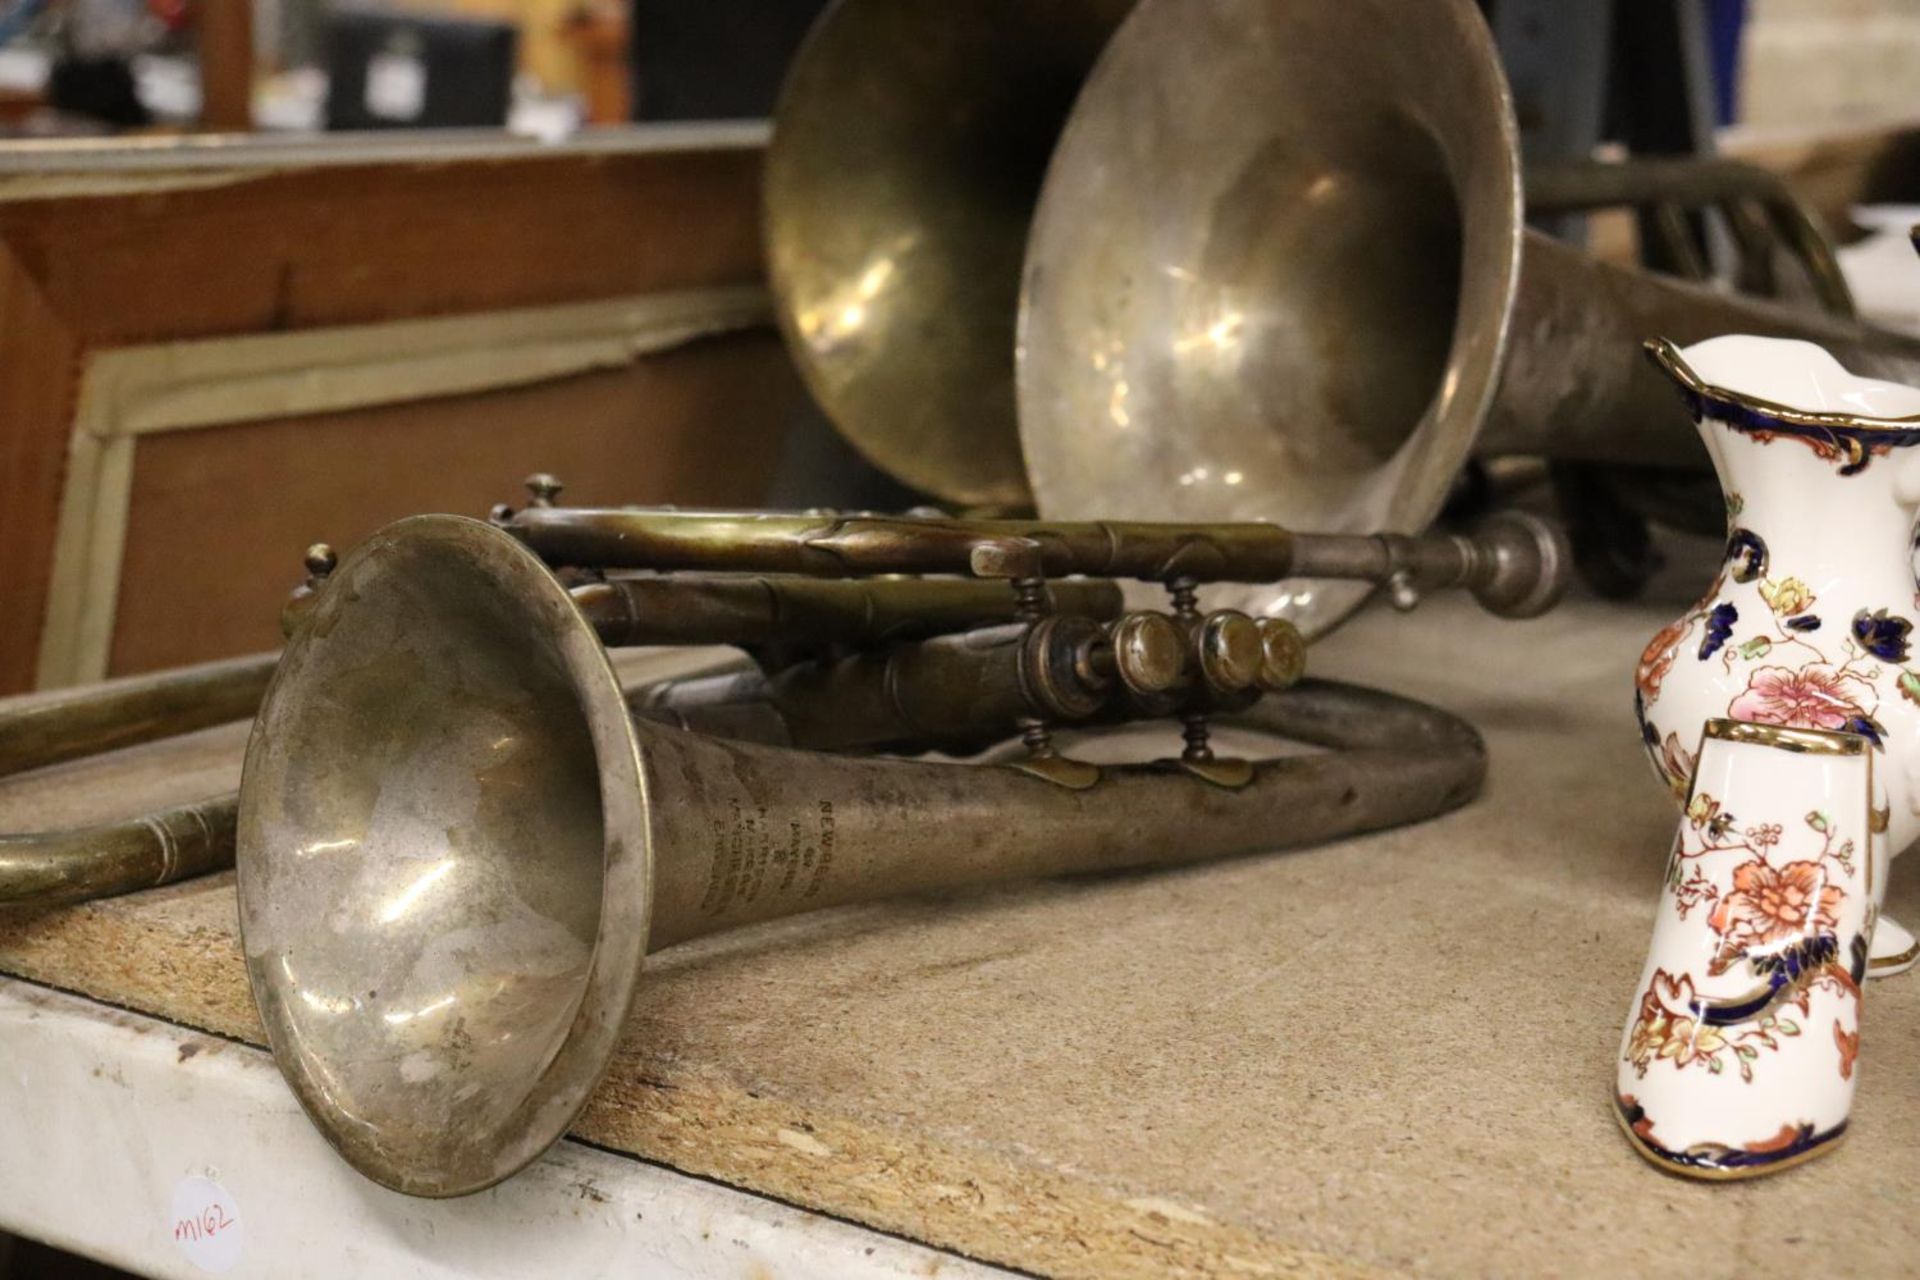 THREE VINTAGE MUSICAL INSTRUMENTS TO INCLUDE A CORNET, BARITONE TENOR HORN AND TROMBONE - Image 2 of 6